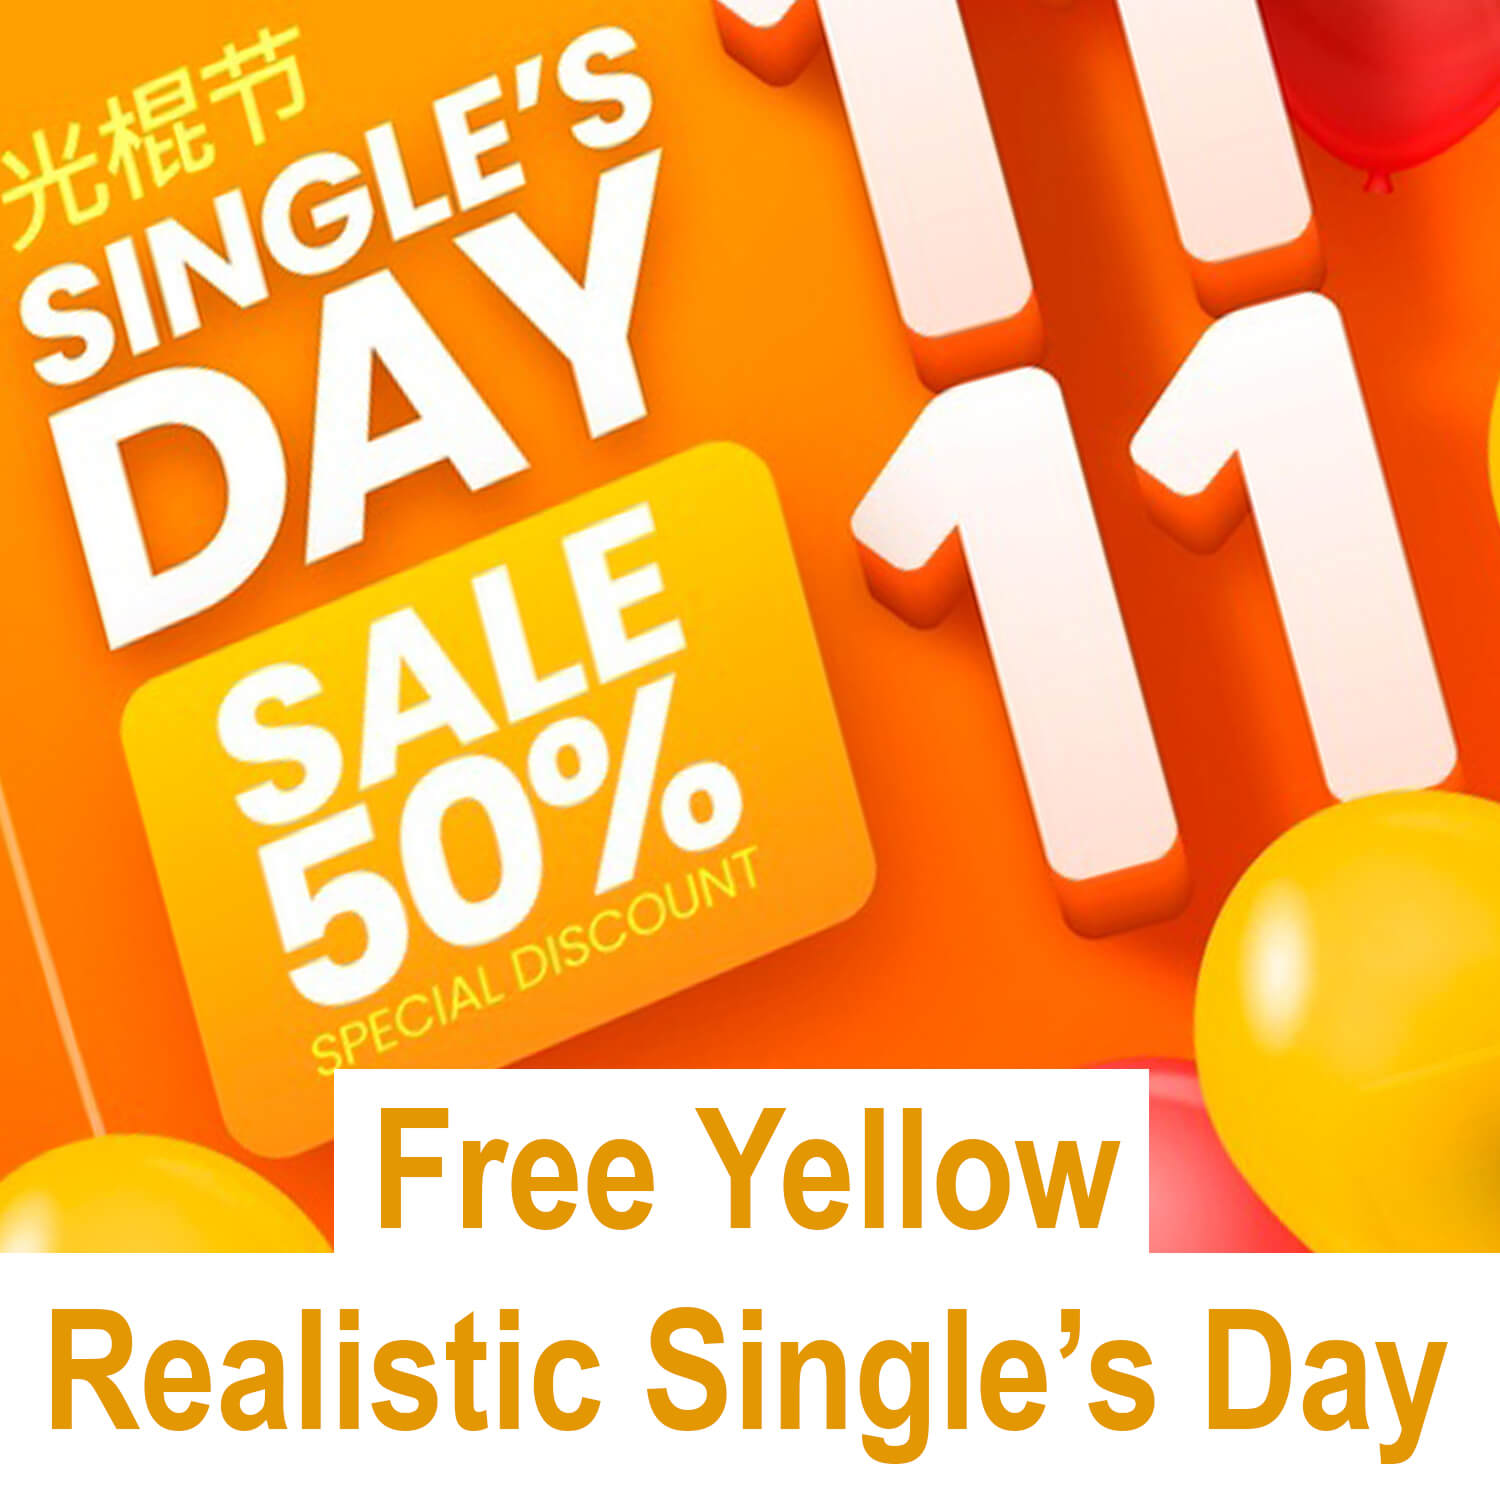 Free Yellow Realistic Single's Day Sale Illustration cover image.